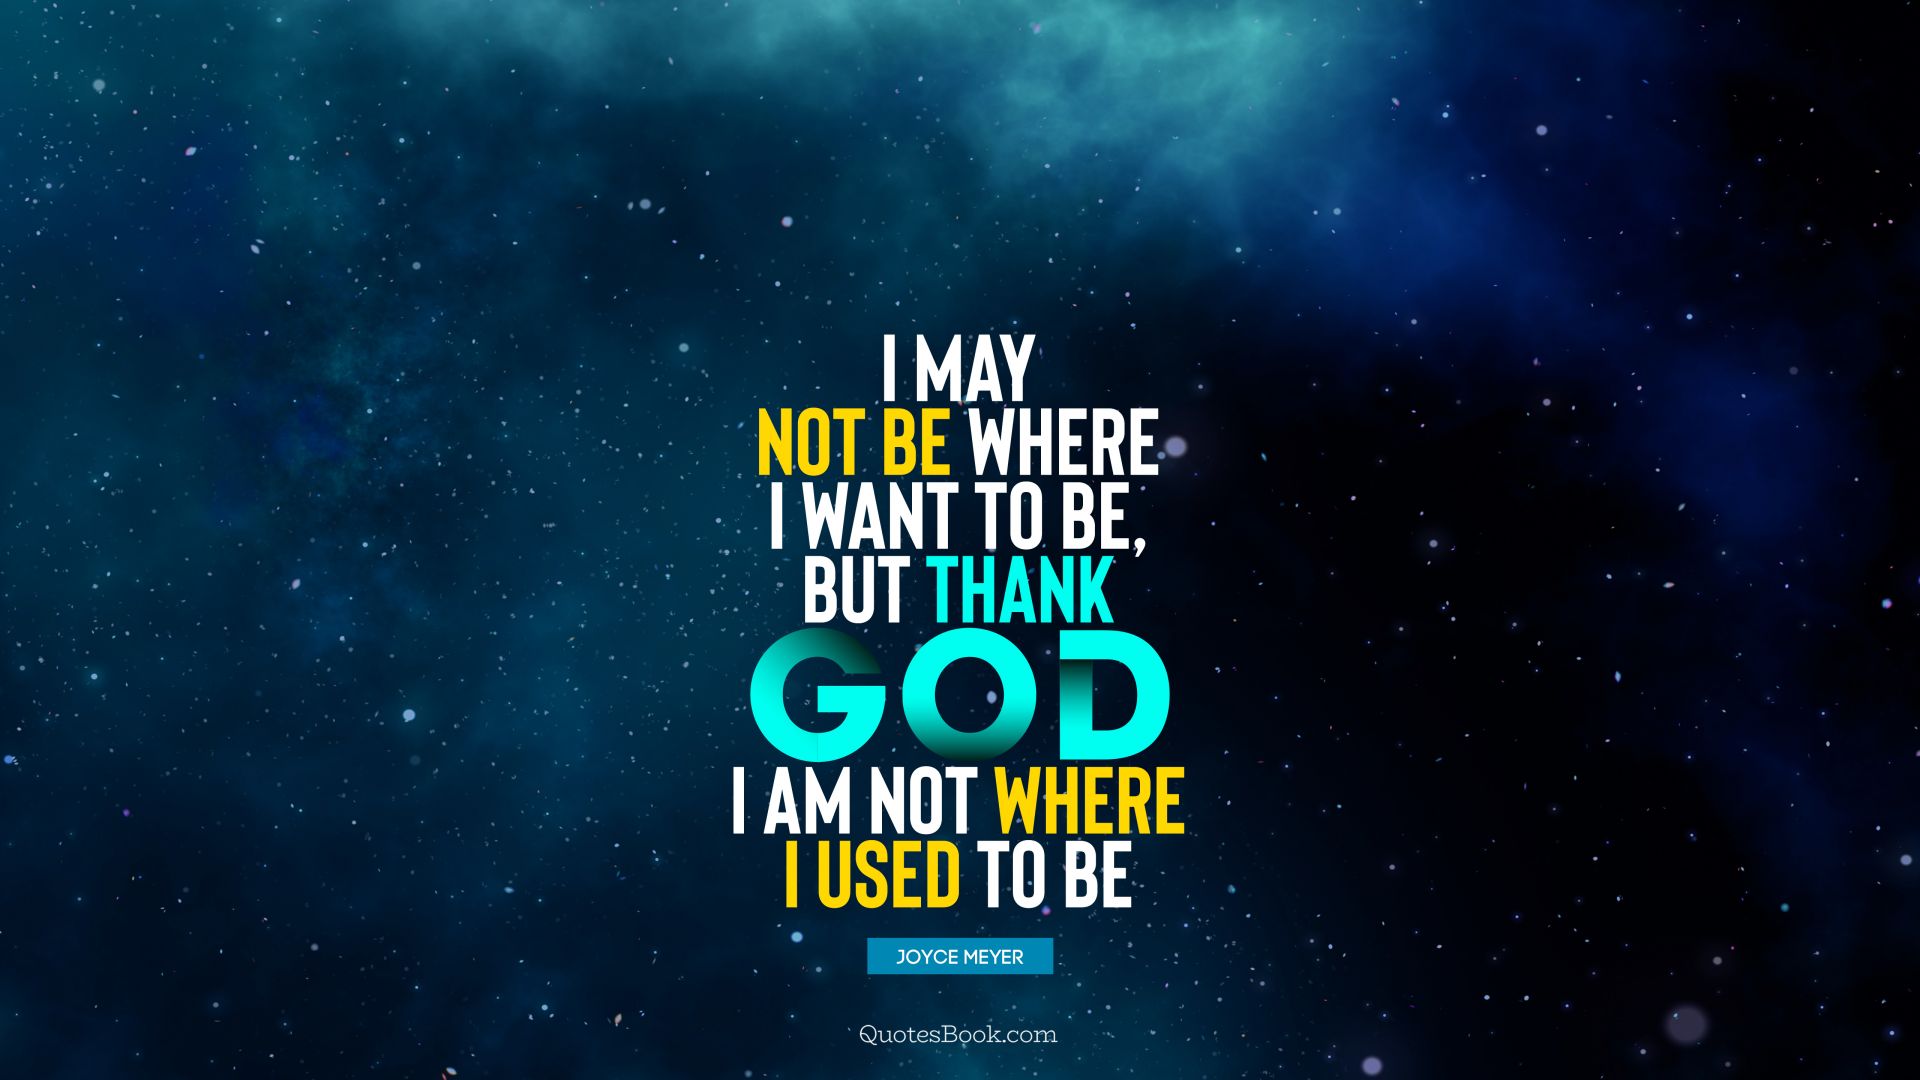 I may not be where I want to be, but thank God I am not where I used to be. - Quote by Joyce Meyer